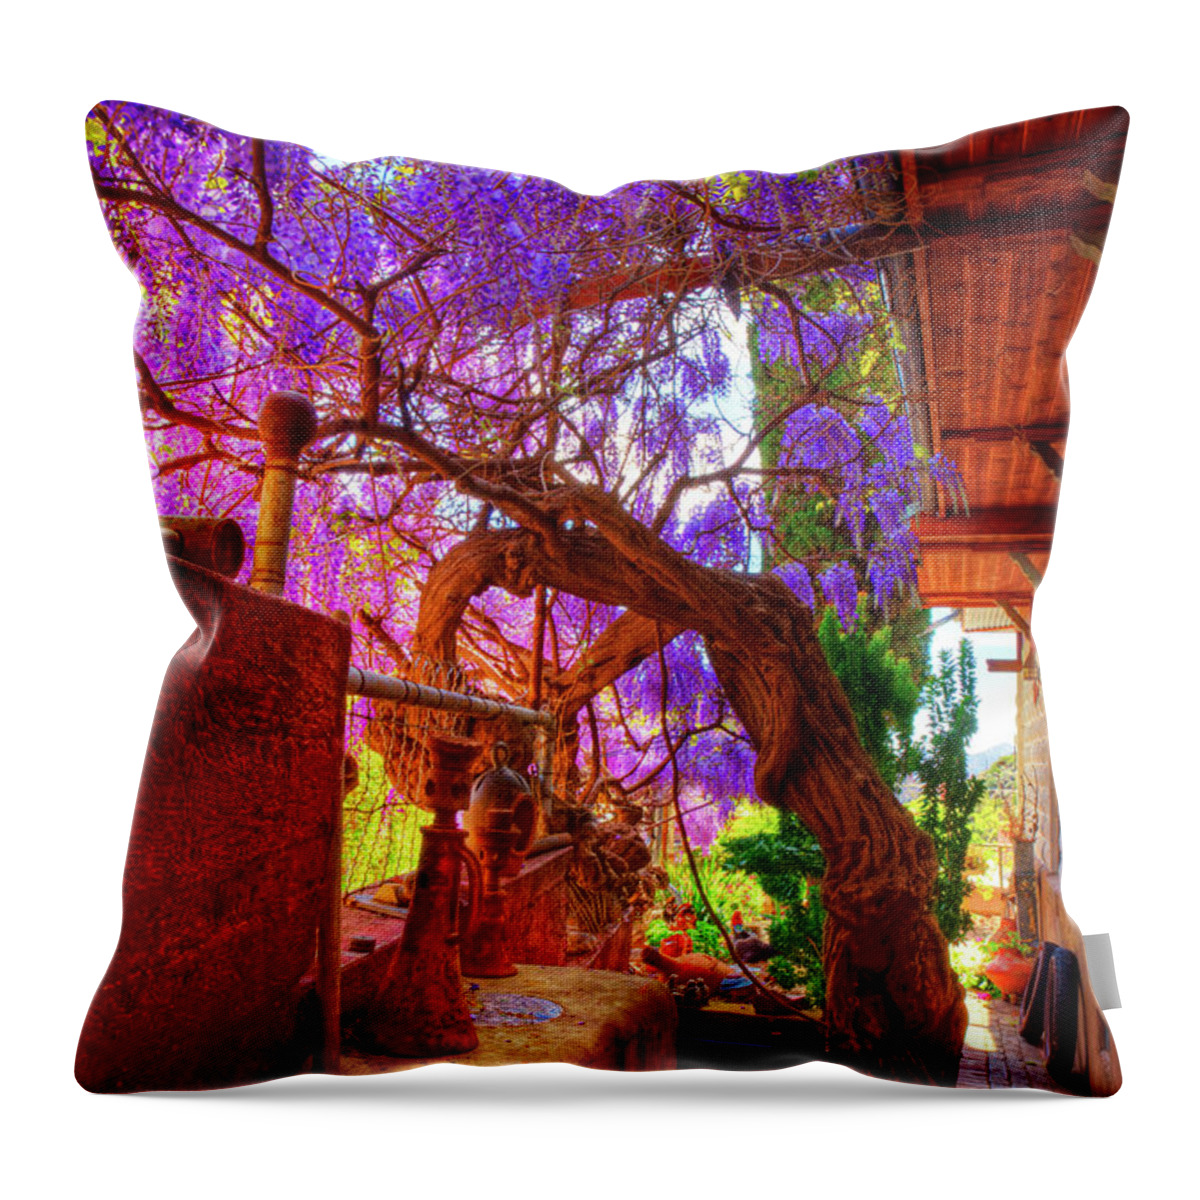 Wisteria Throw Pillow featuring the photograph Wisteria Canopy in Bisbee Arizona by Charlene Mitchell